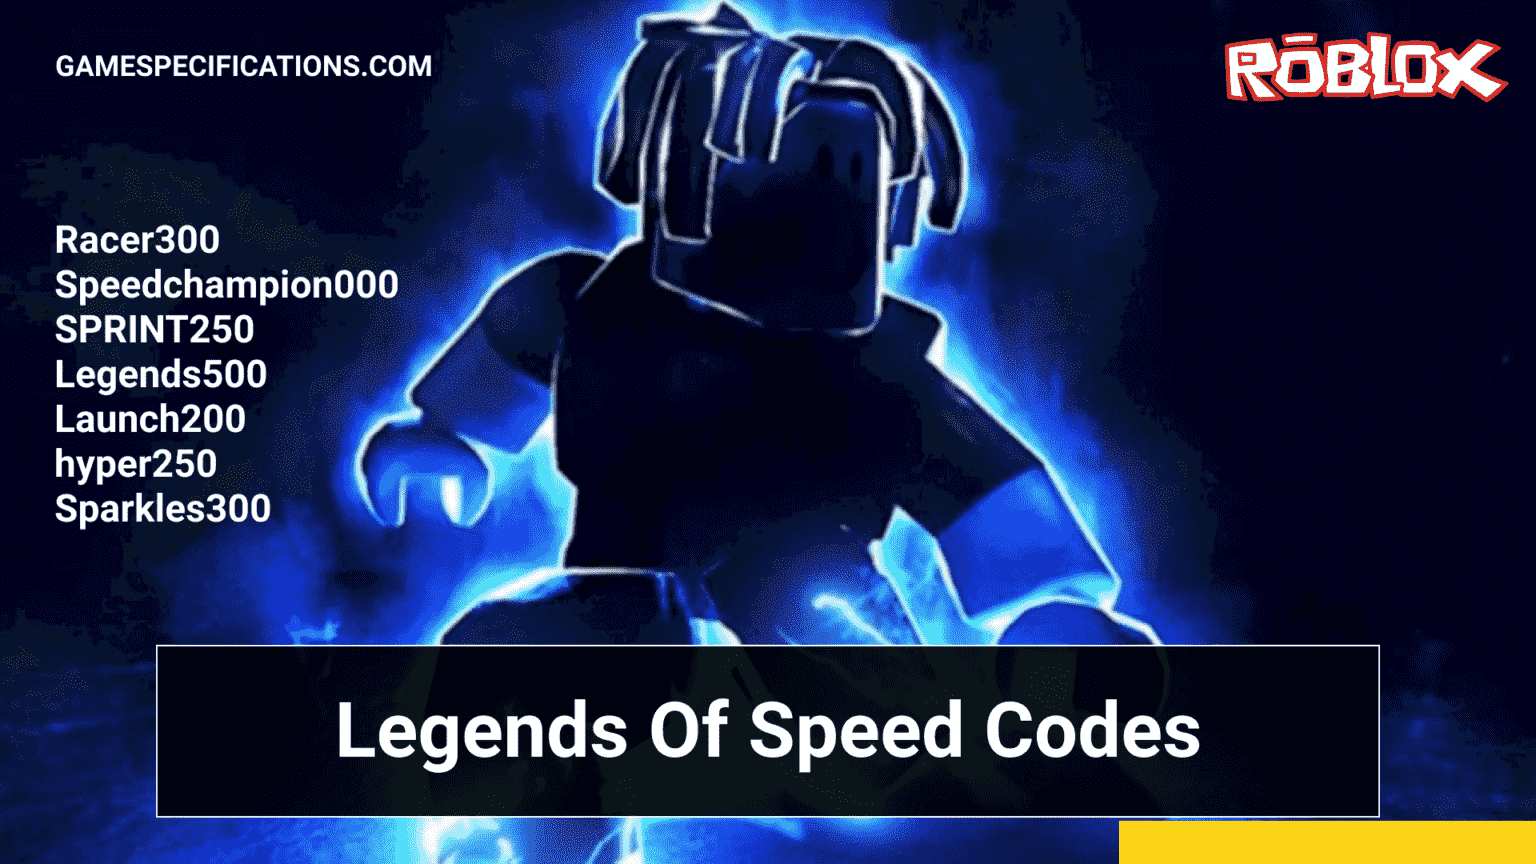 roblox-codes-for-legends-of-speed-august-2022-game-specifications